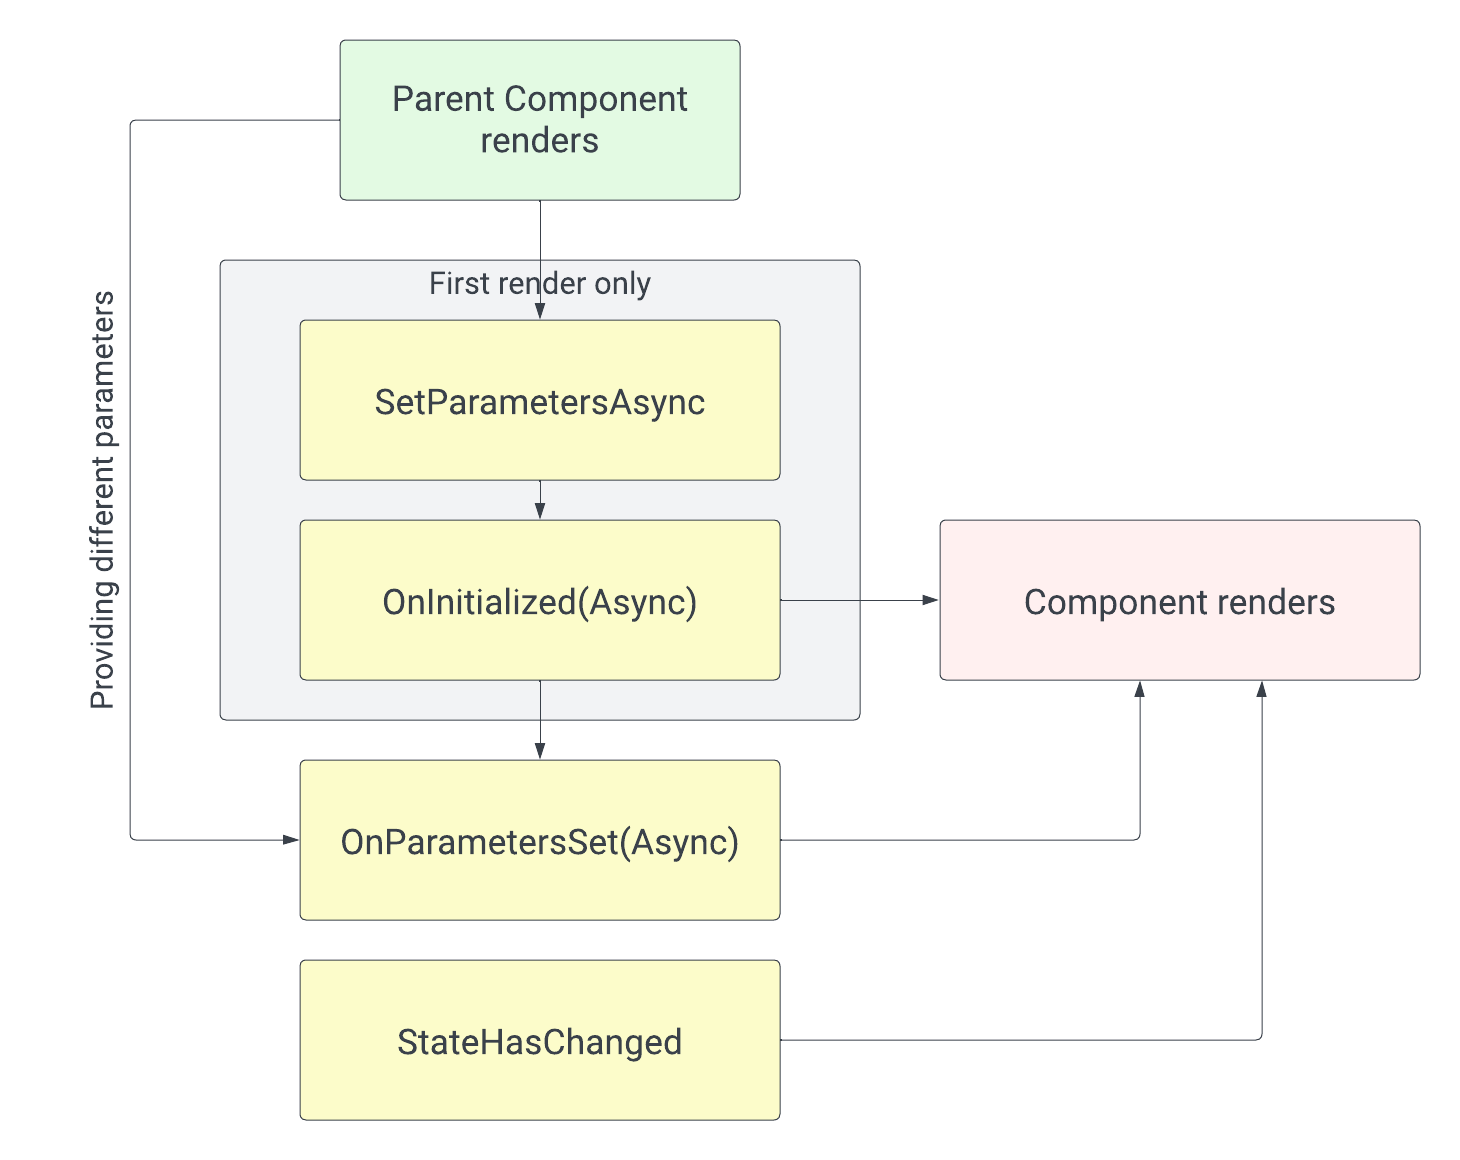 A diagram with the parent component at the top. The parent component triggers the child component creation. The SetParametersAsync lifecycle method and the OnInitialized(Async) methods are triggered only for the first render. The OnParametersSet(Async) method is triggered when the parent component provides a different parameter to its child component. The StateHasChanged method can be used by the developer to trigger a manual rerender of the component.